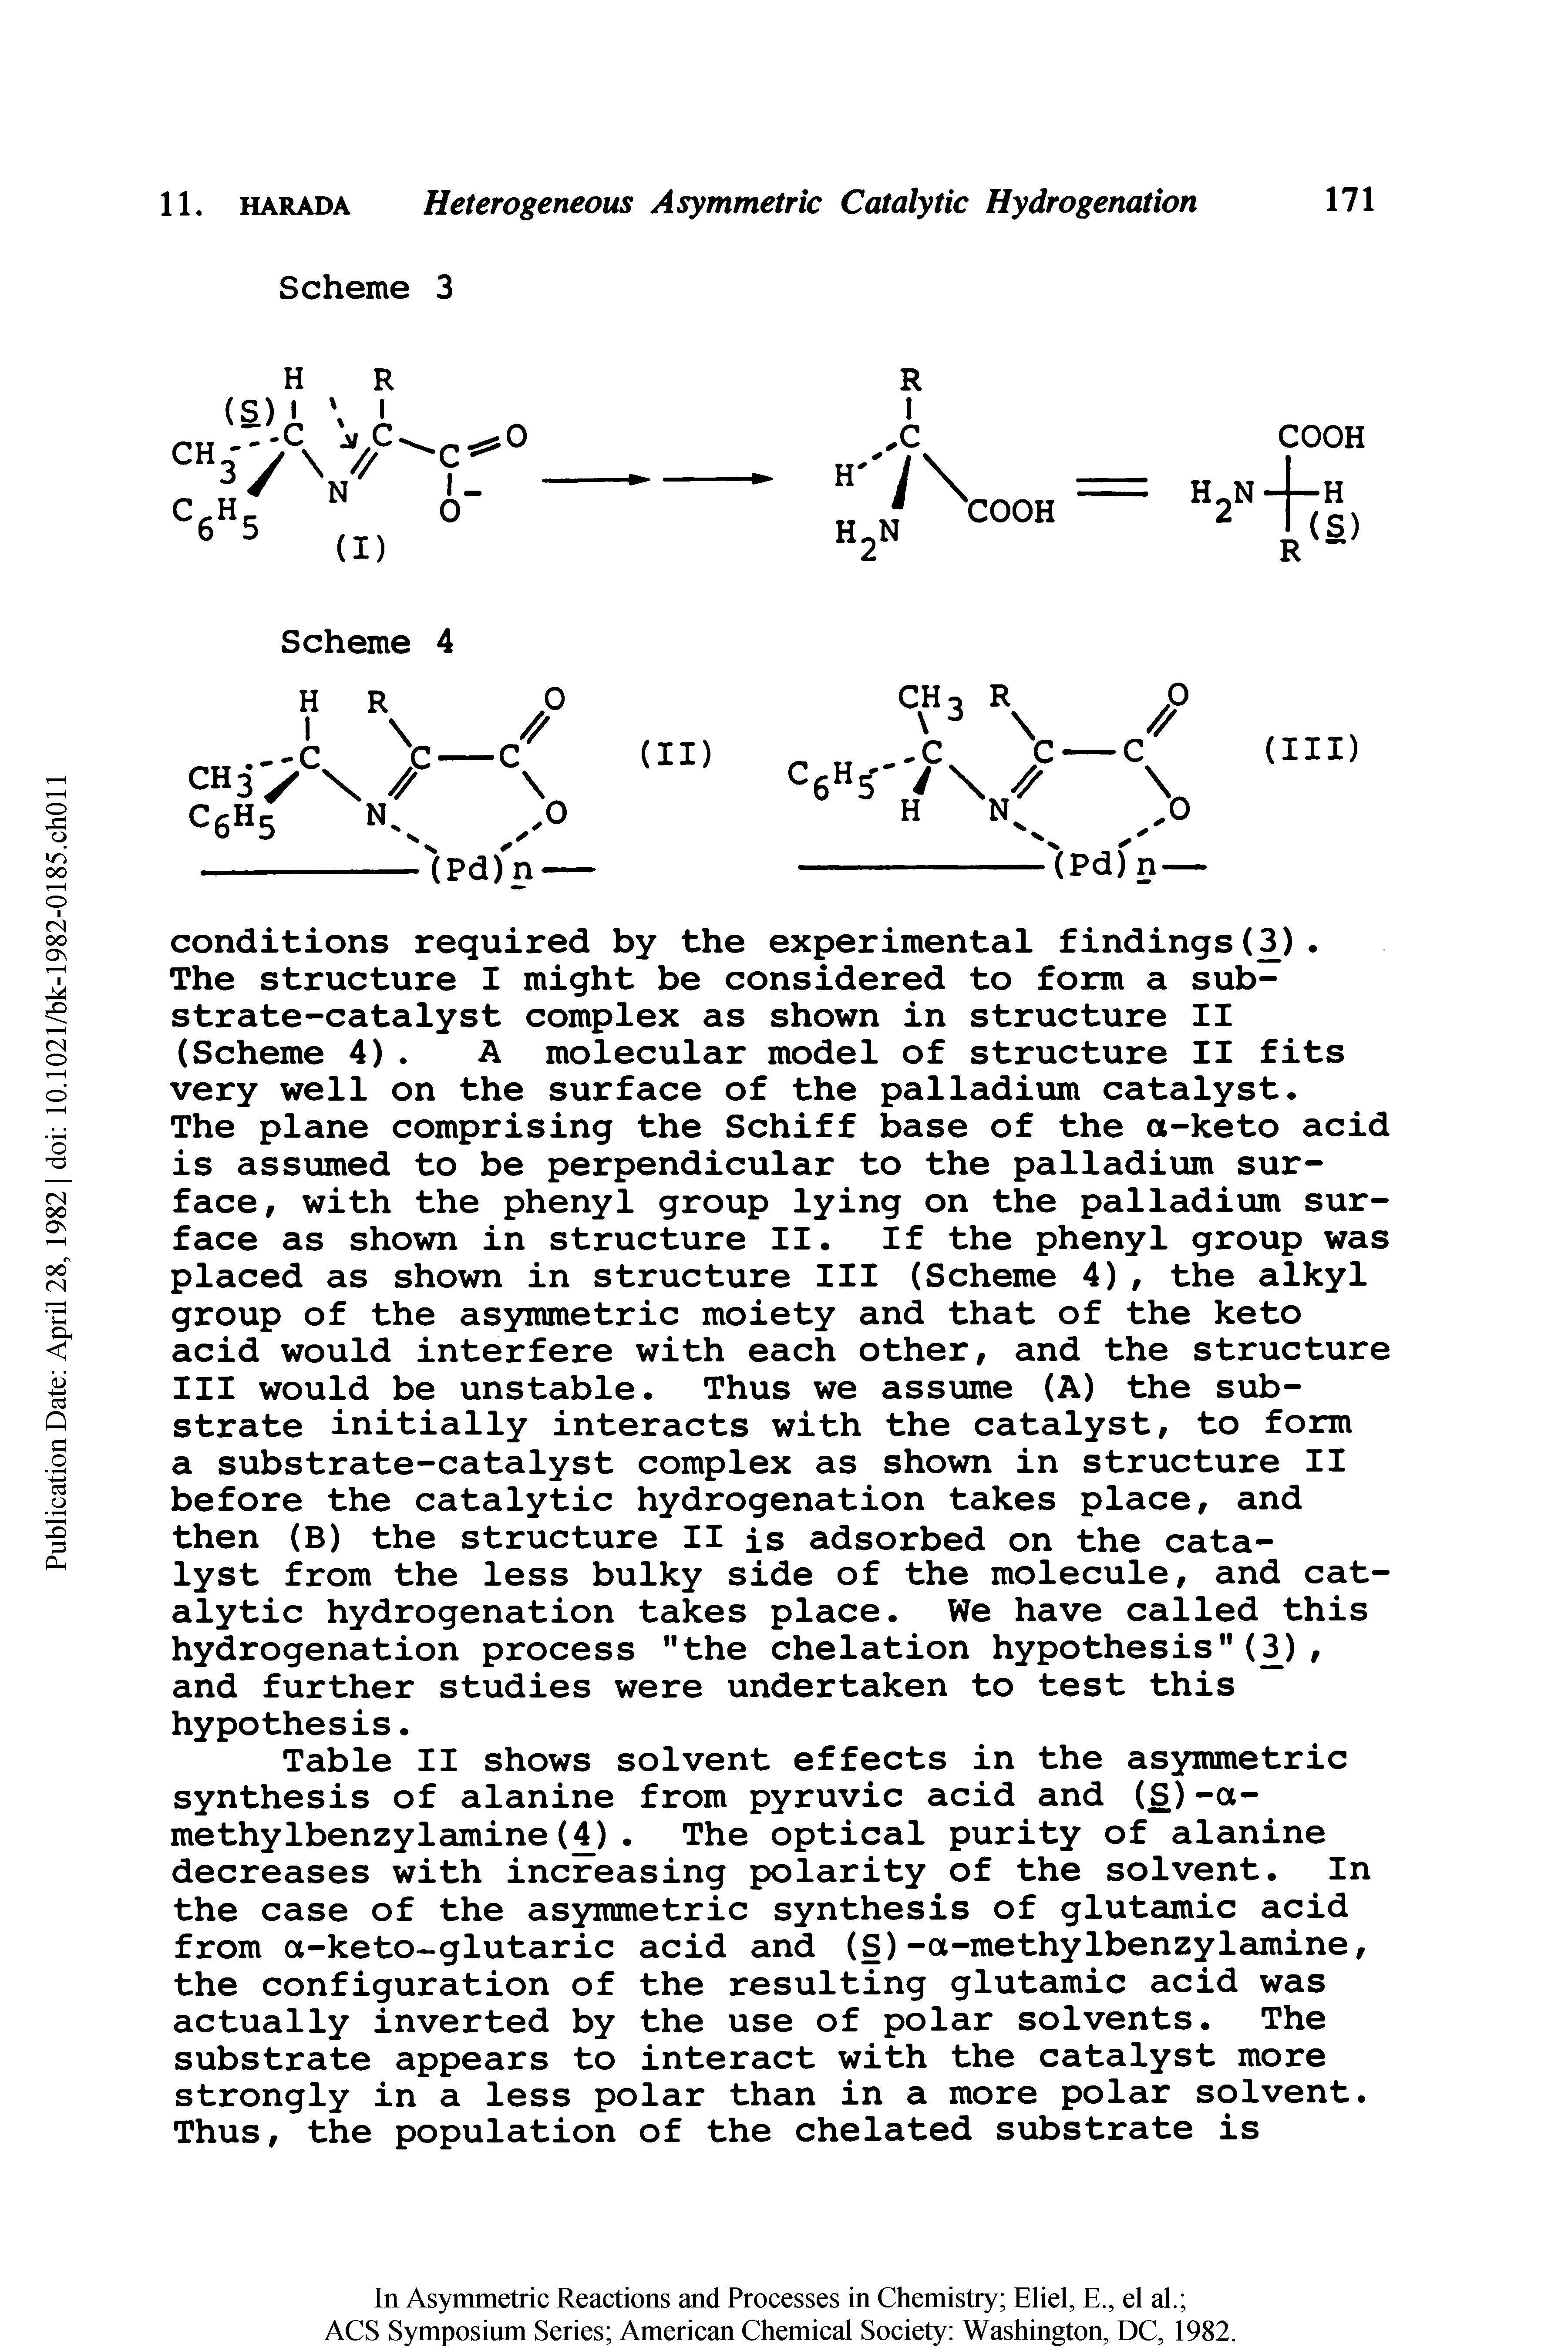 Table II shows solvent effects in the asymmetric synthesis of alanine from pyruvic acid and (S)-a-methylbenzylamine( ). The optical purity of alanine decreases with increasing polarity of the solvent. In the case of the asymmetric synthesis of glutamic acid from a-keto glutaric acid and (S)-a-methylbenzylcimine, the configuration of the resulting glutamic acid was actually inverted by the use of polar solvents. The substrate appears to interact with the catalyst more strongly in a less polar than in a more polar solvent. Thus, the population of the chelated substrate is...